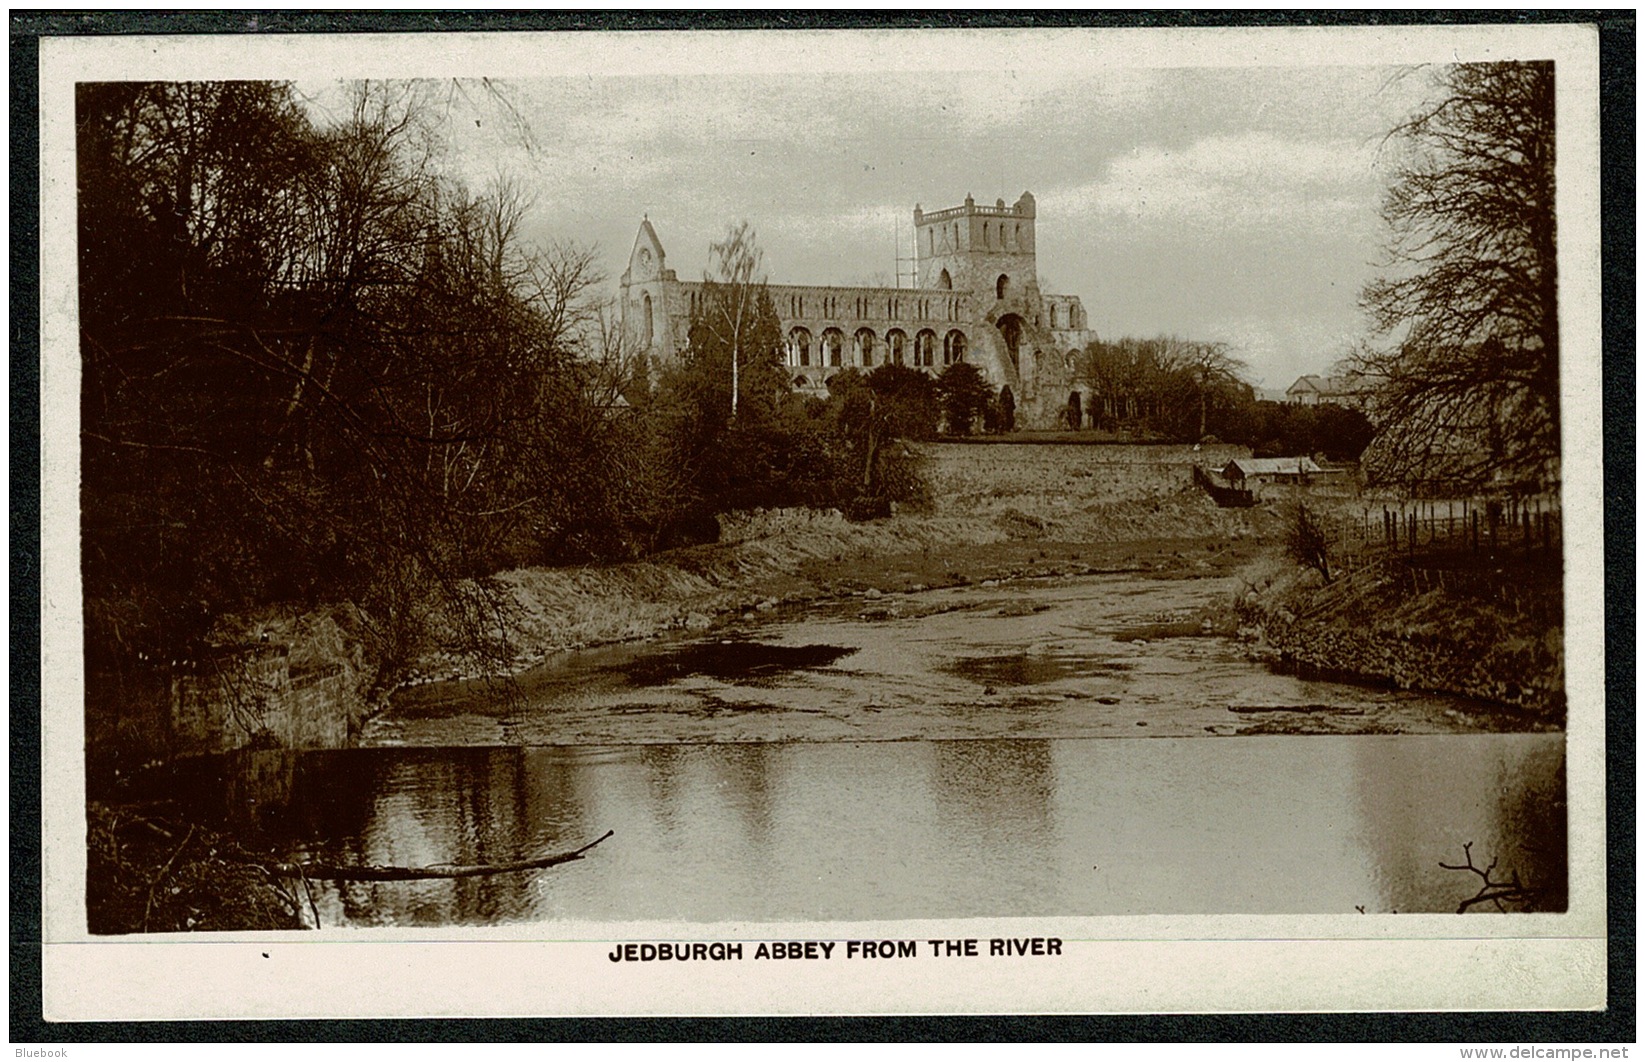 RB 1207 - Real Photo Postcard - Jedburgh Abbey From The River - Scotland - Roxburghshire